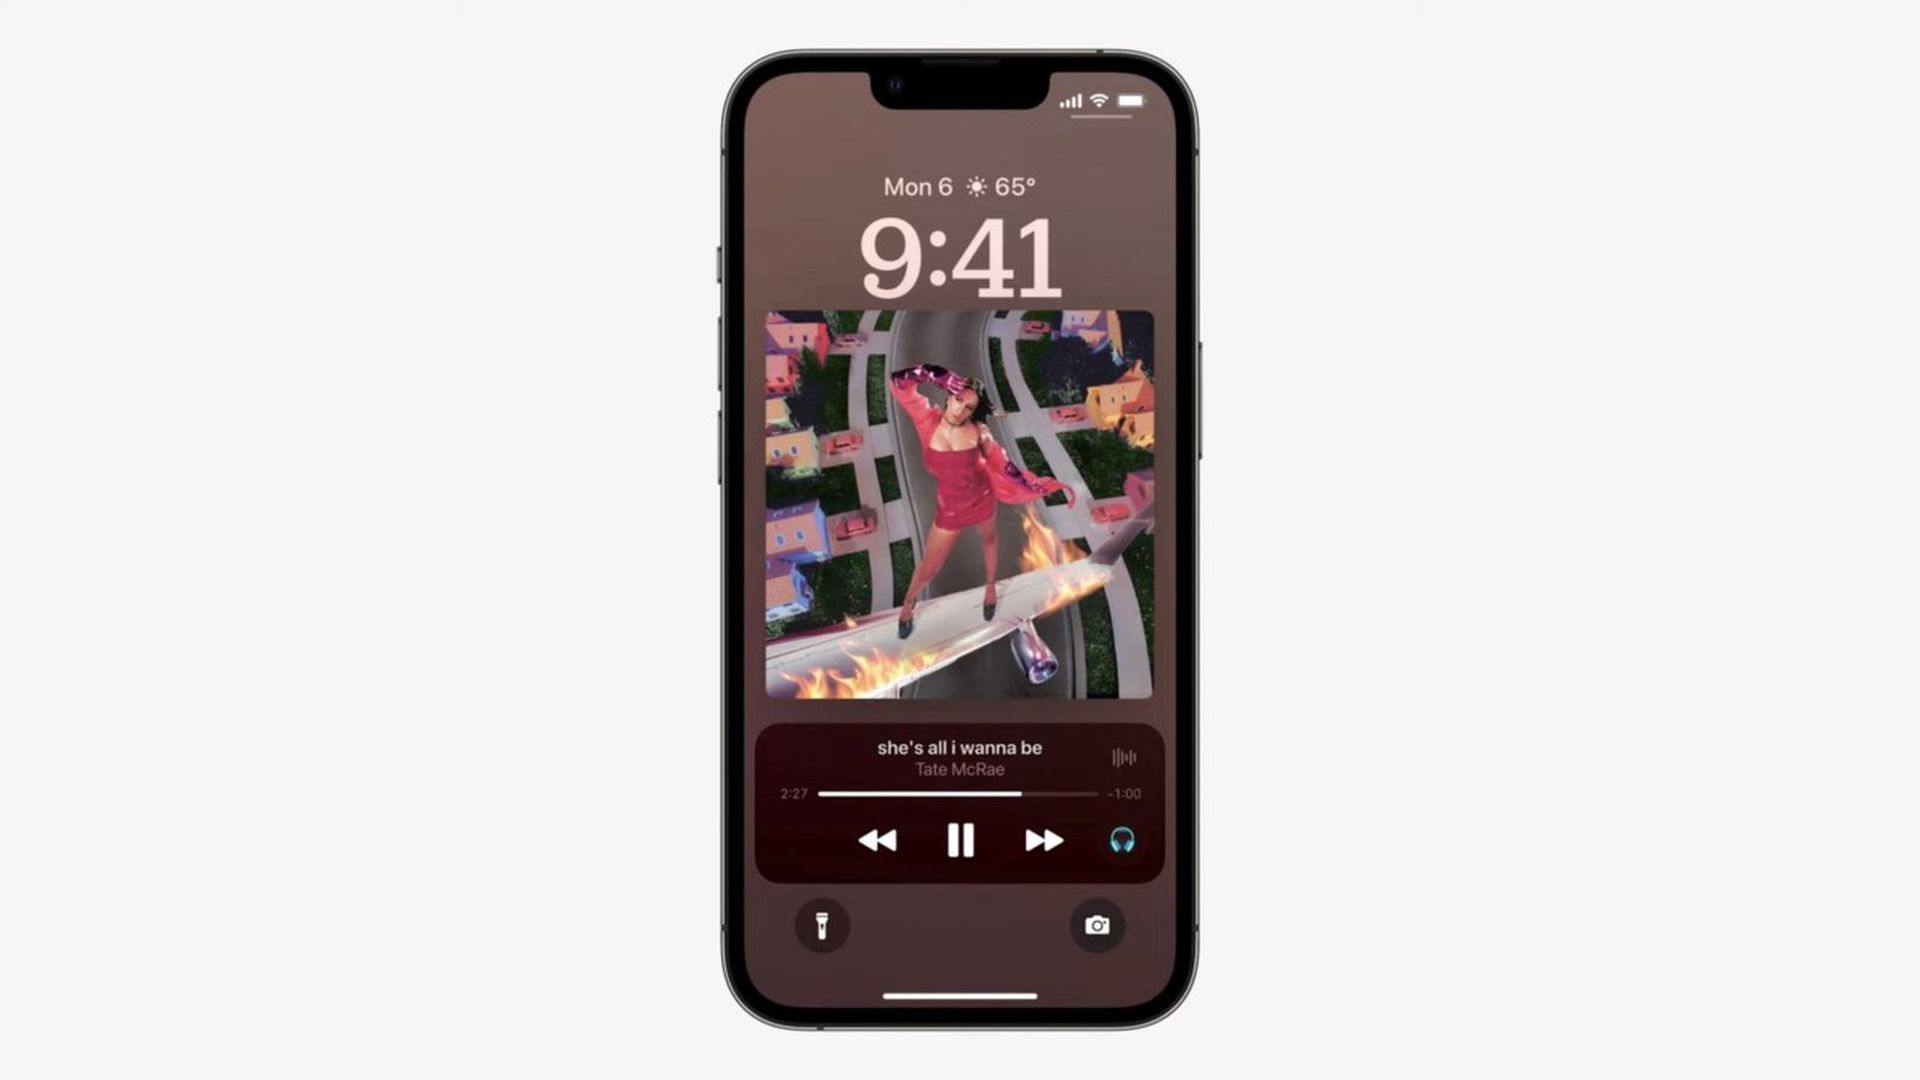 In this article, we're going to be covering how to get full screen music player on Lock Screen on iOS 16, so you can see what you are listening to on full screen.